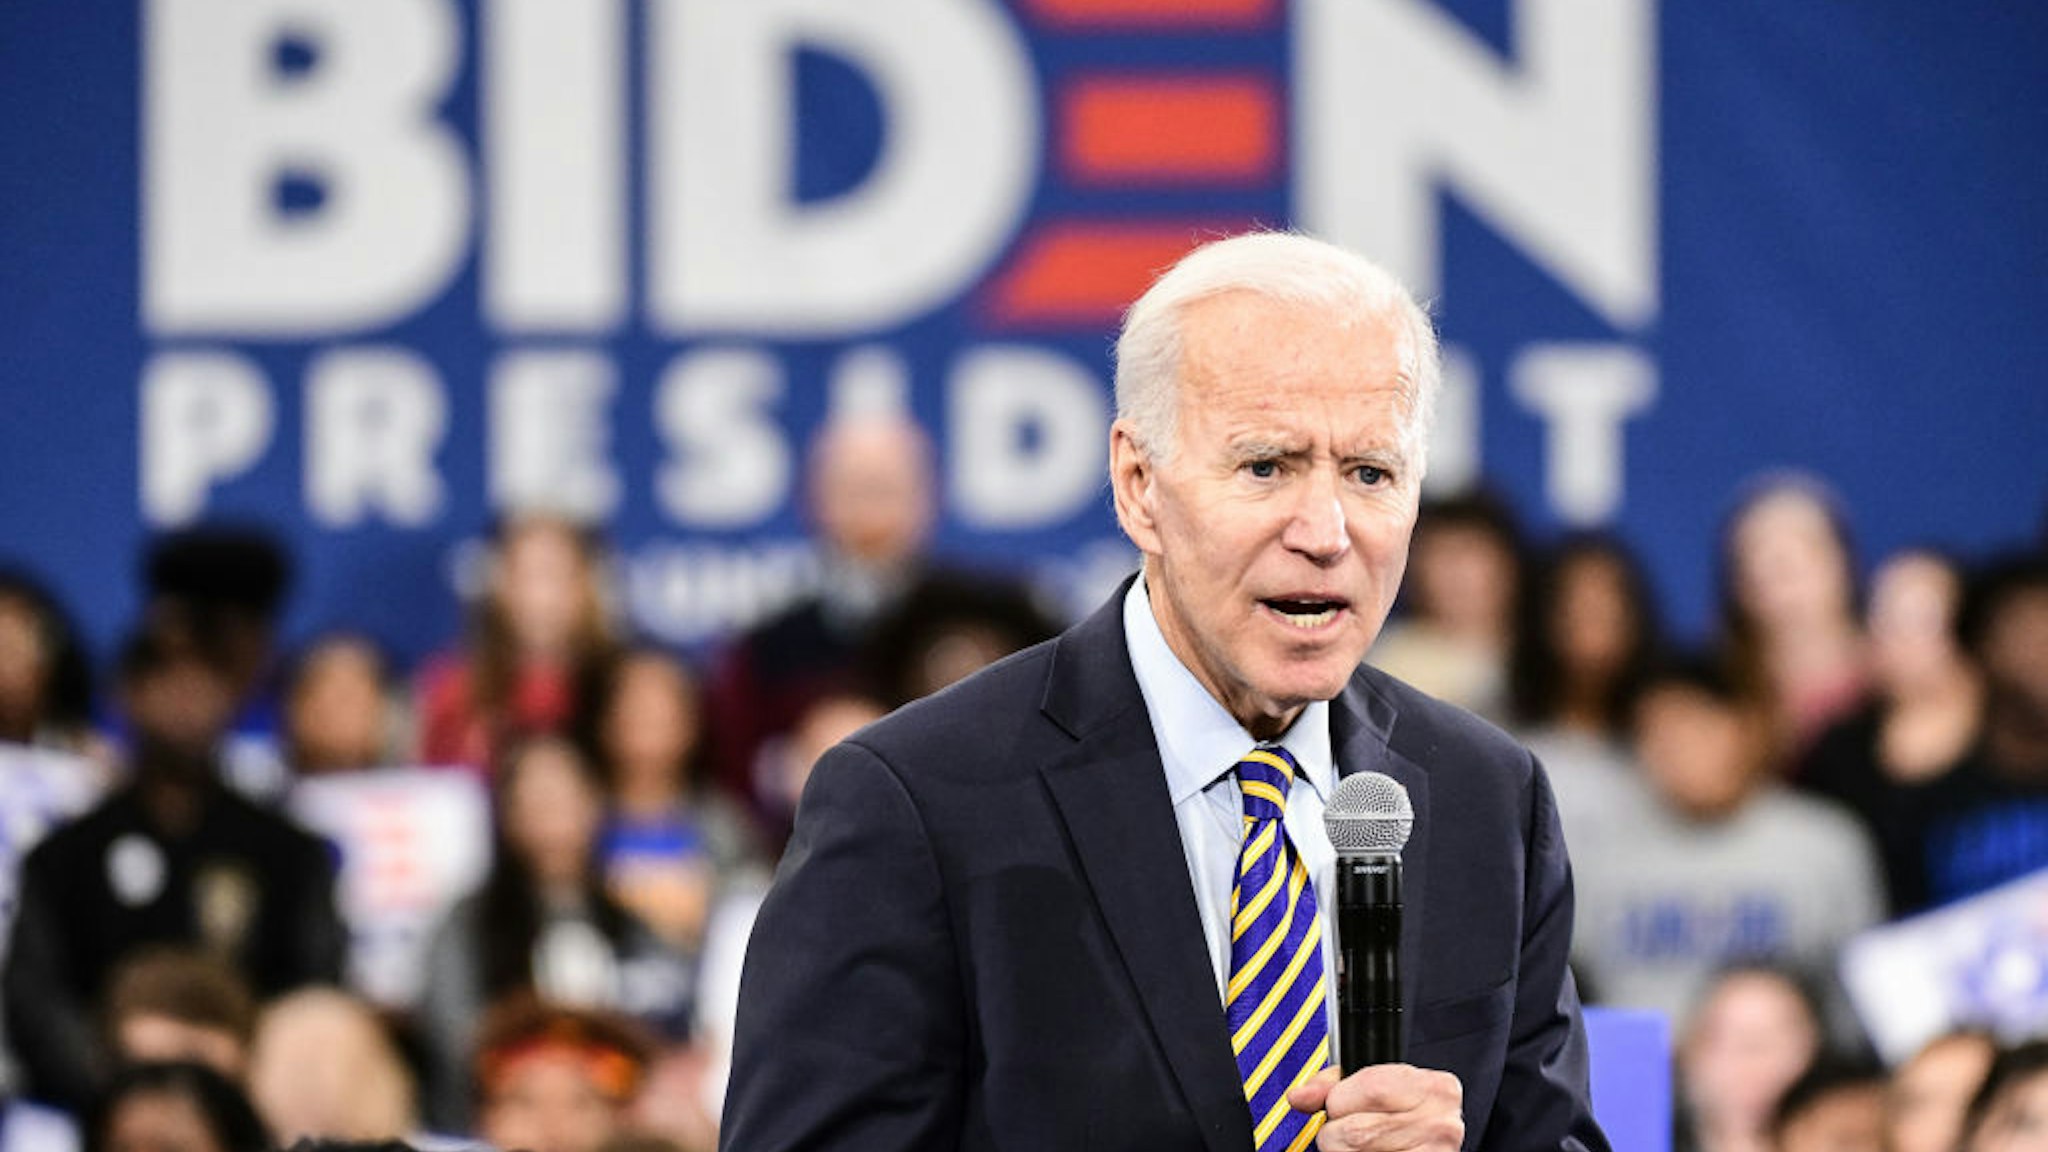 Democratic presidential candidate, former vice President Joe Biden speaks to the audience during a town hall on November 21, 2019 in Greenwood, South Carolina.